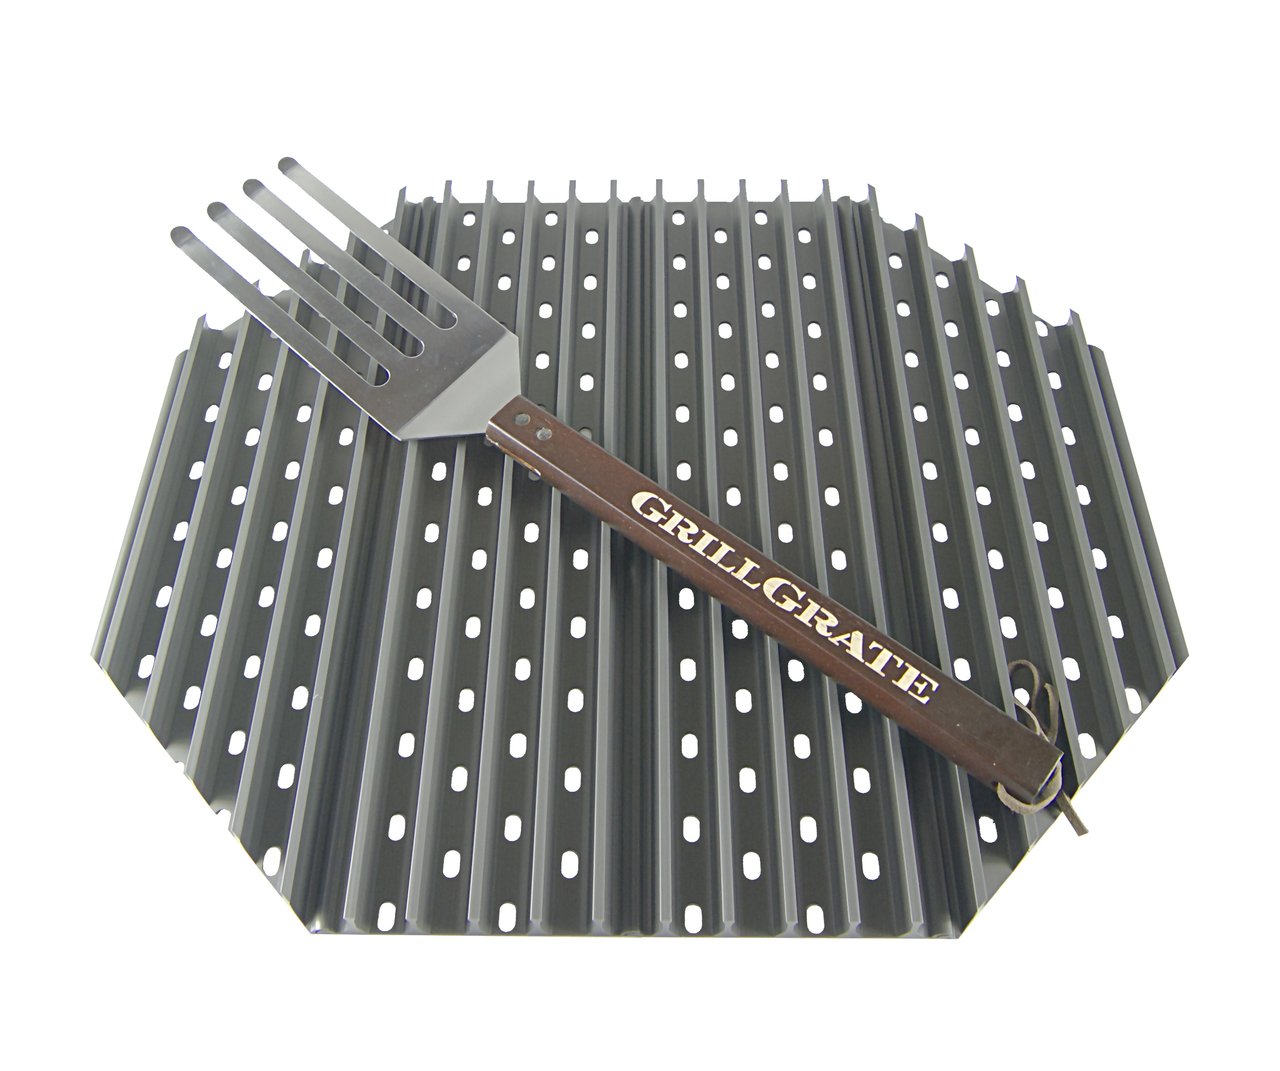 GrillGrates for the Primo Oval XL Kamado Grill